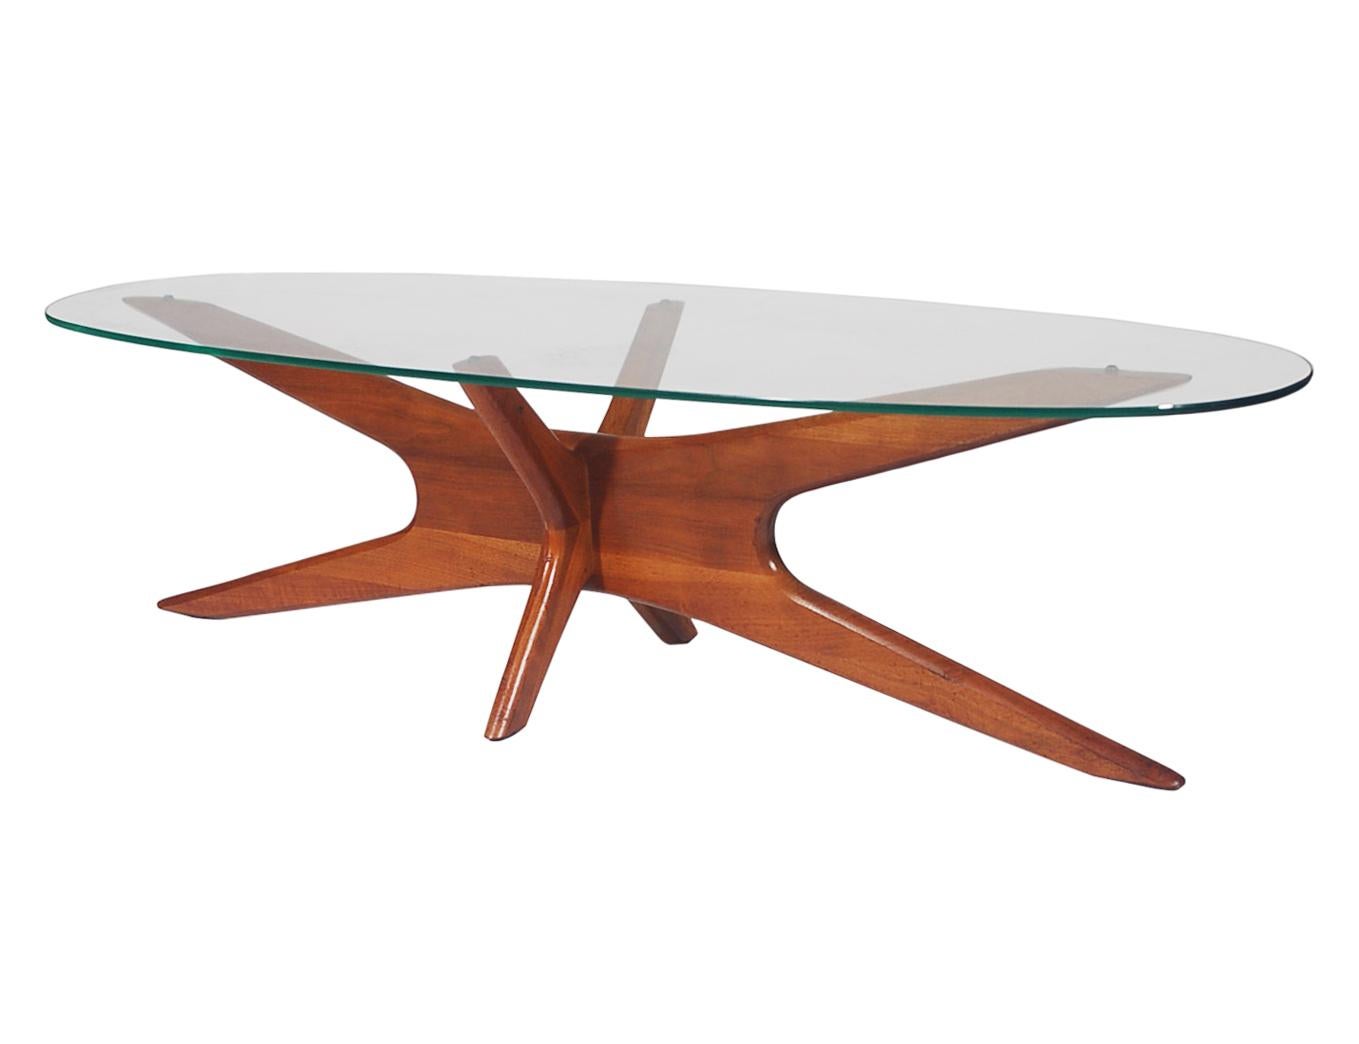 Mid-20th Century Mid-Century Modern Oval Walnut and Glass Cocktail Table by Adrian Pearsall For Sale